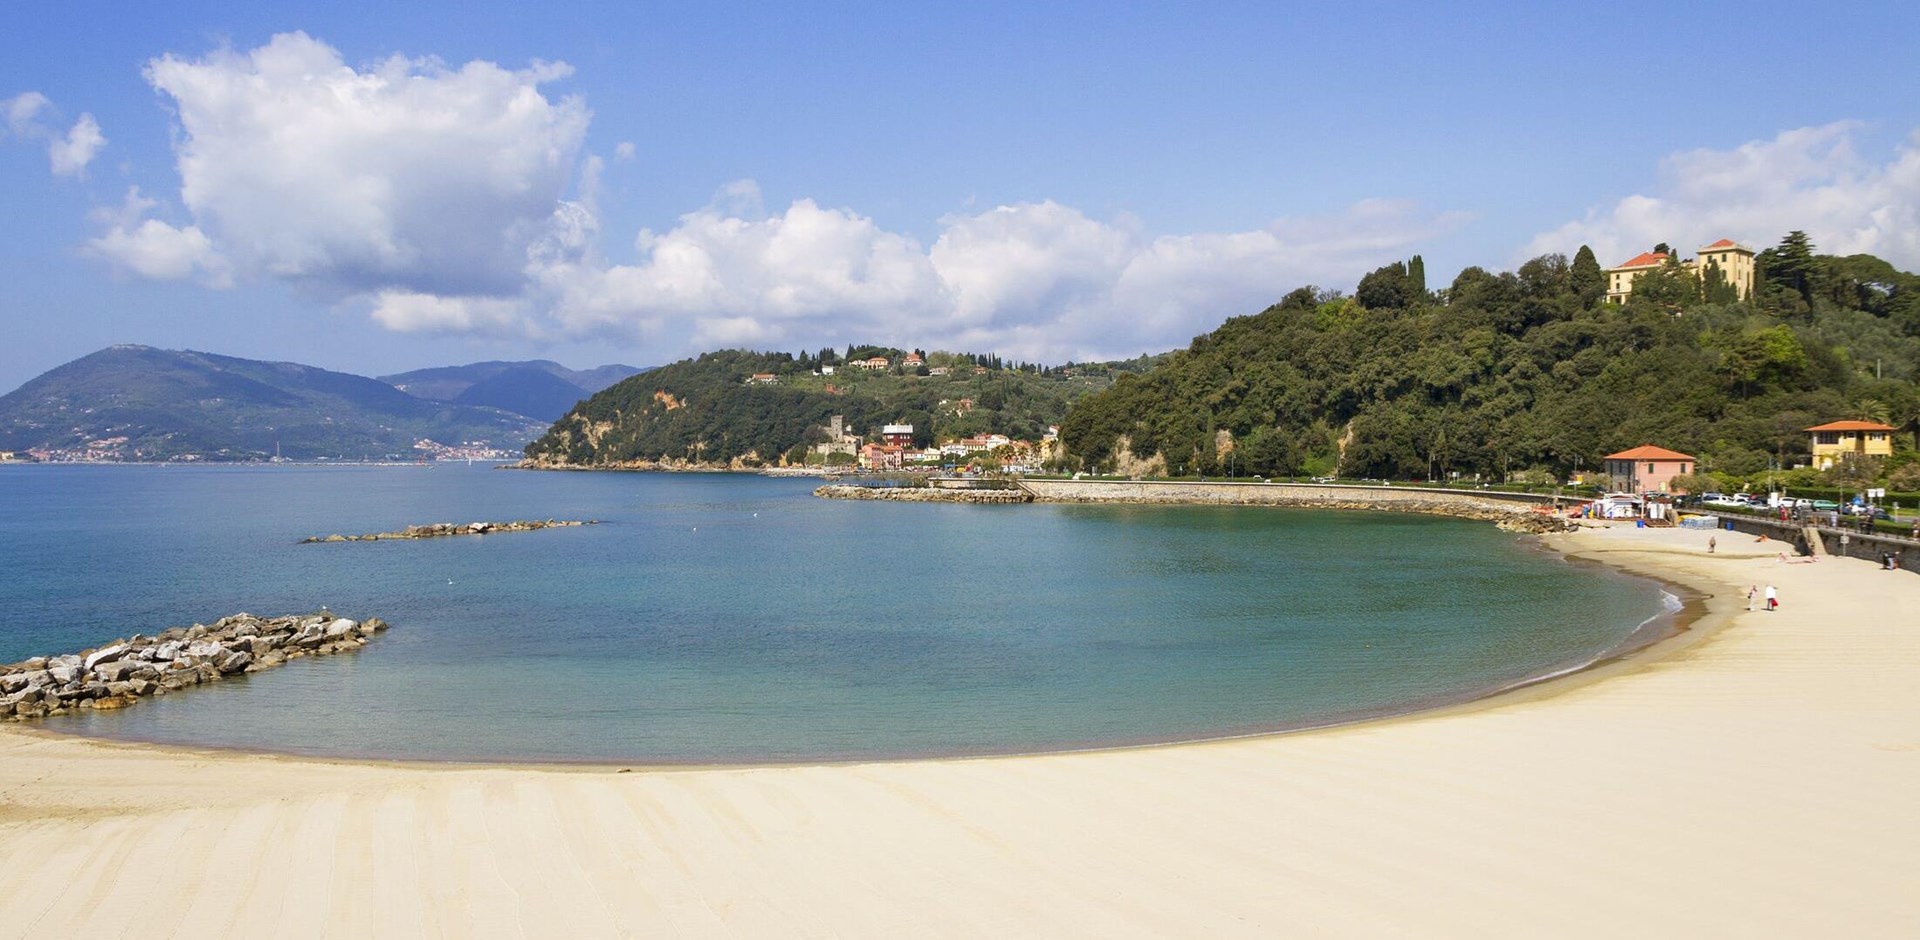 View to the beach in the Lerici, Italy.